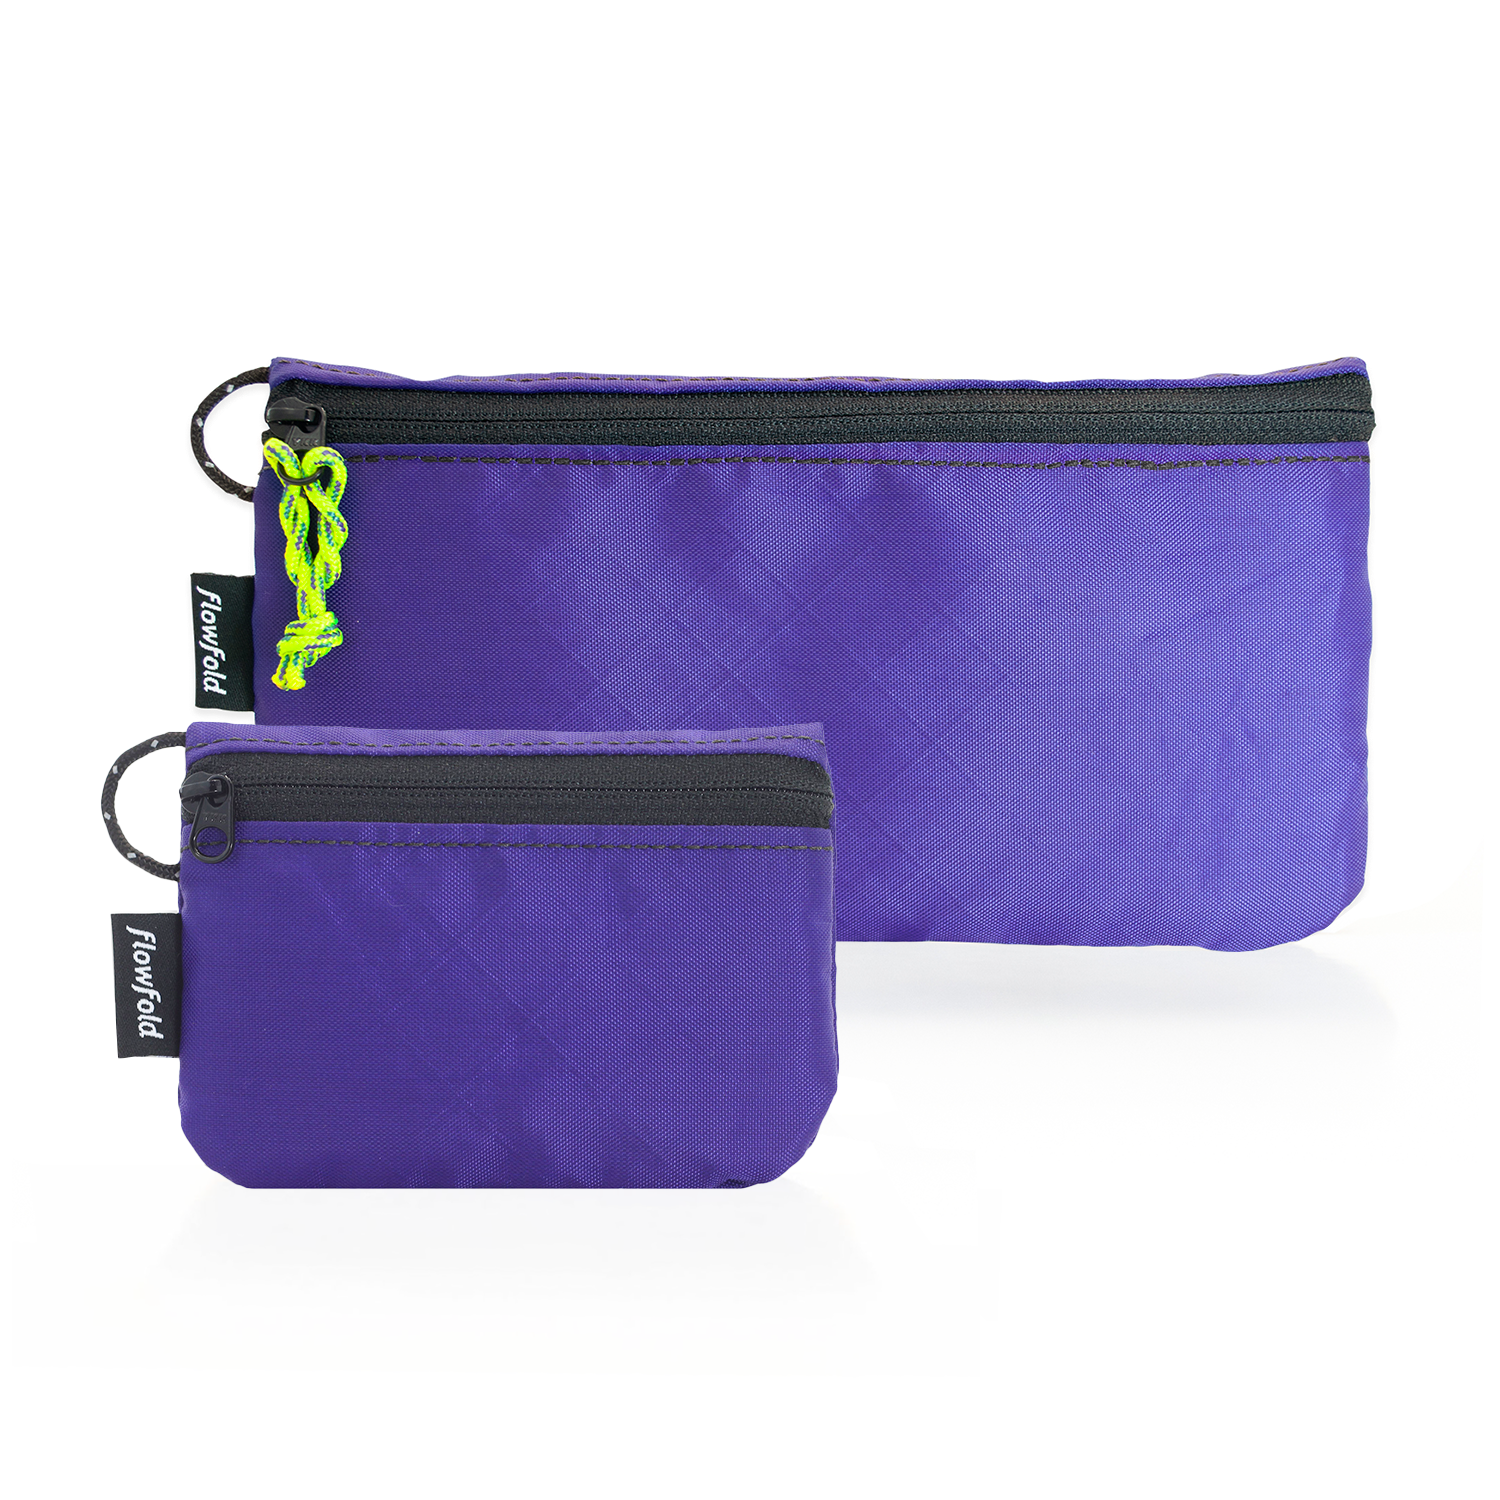 Flowfold Camden Kit: Creator Large Zippered Women's Wallet For Cash, Cards, and Phone + Essentialist Zipper Pouch, Recycled Purple